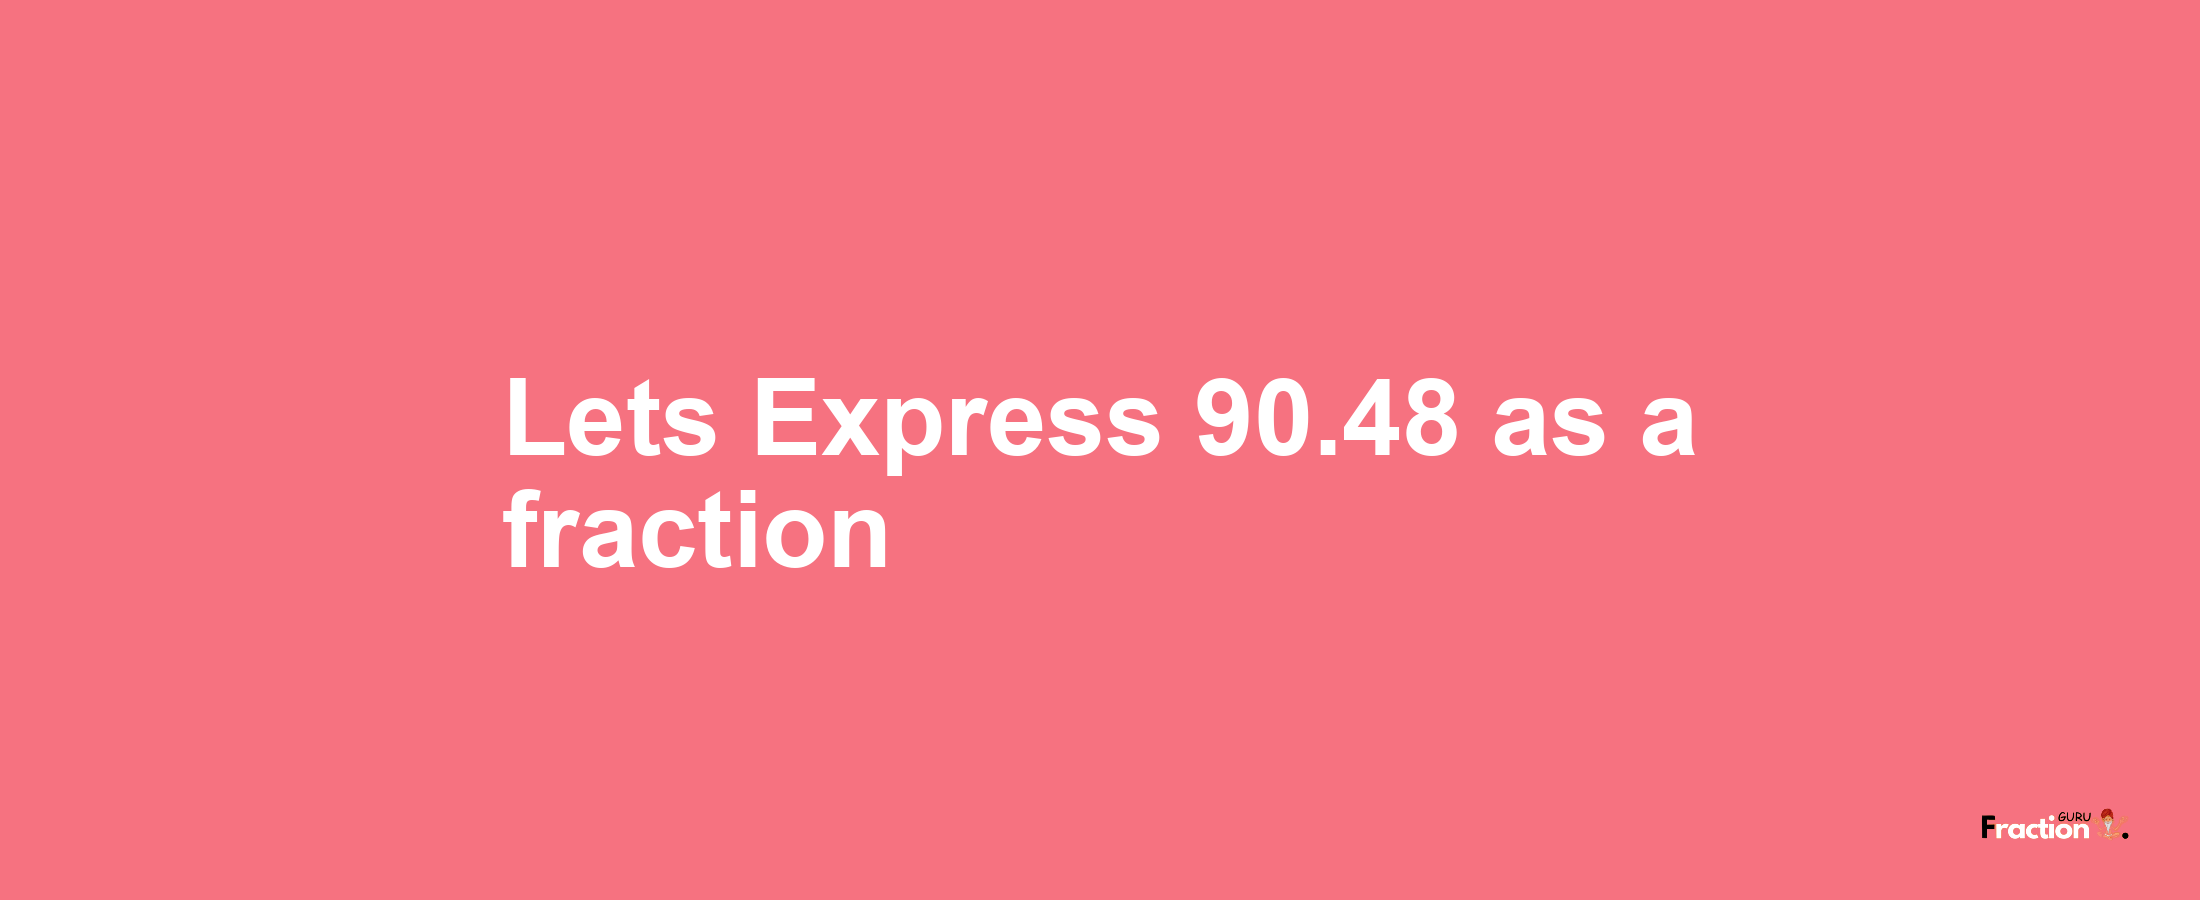 Lets Express 90.48 as afraction